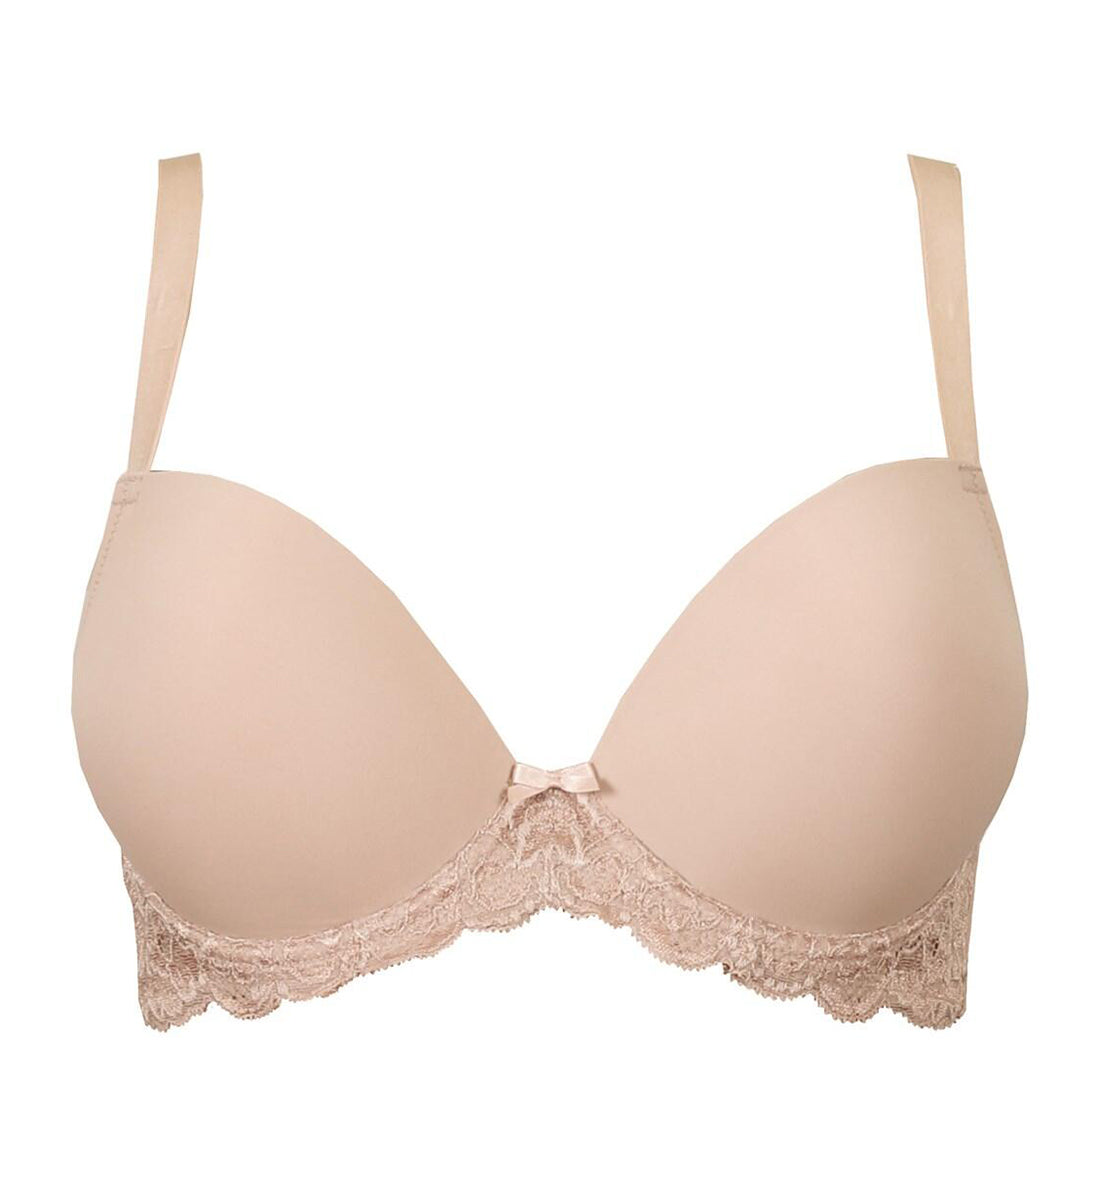 Pour Moi Forever Fiore Plunge Push Up Underwire T-shirt Bra (183309)- Almond